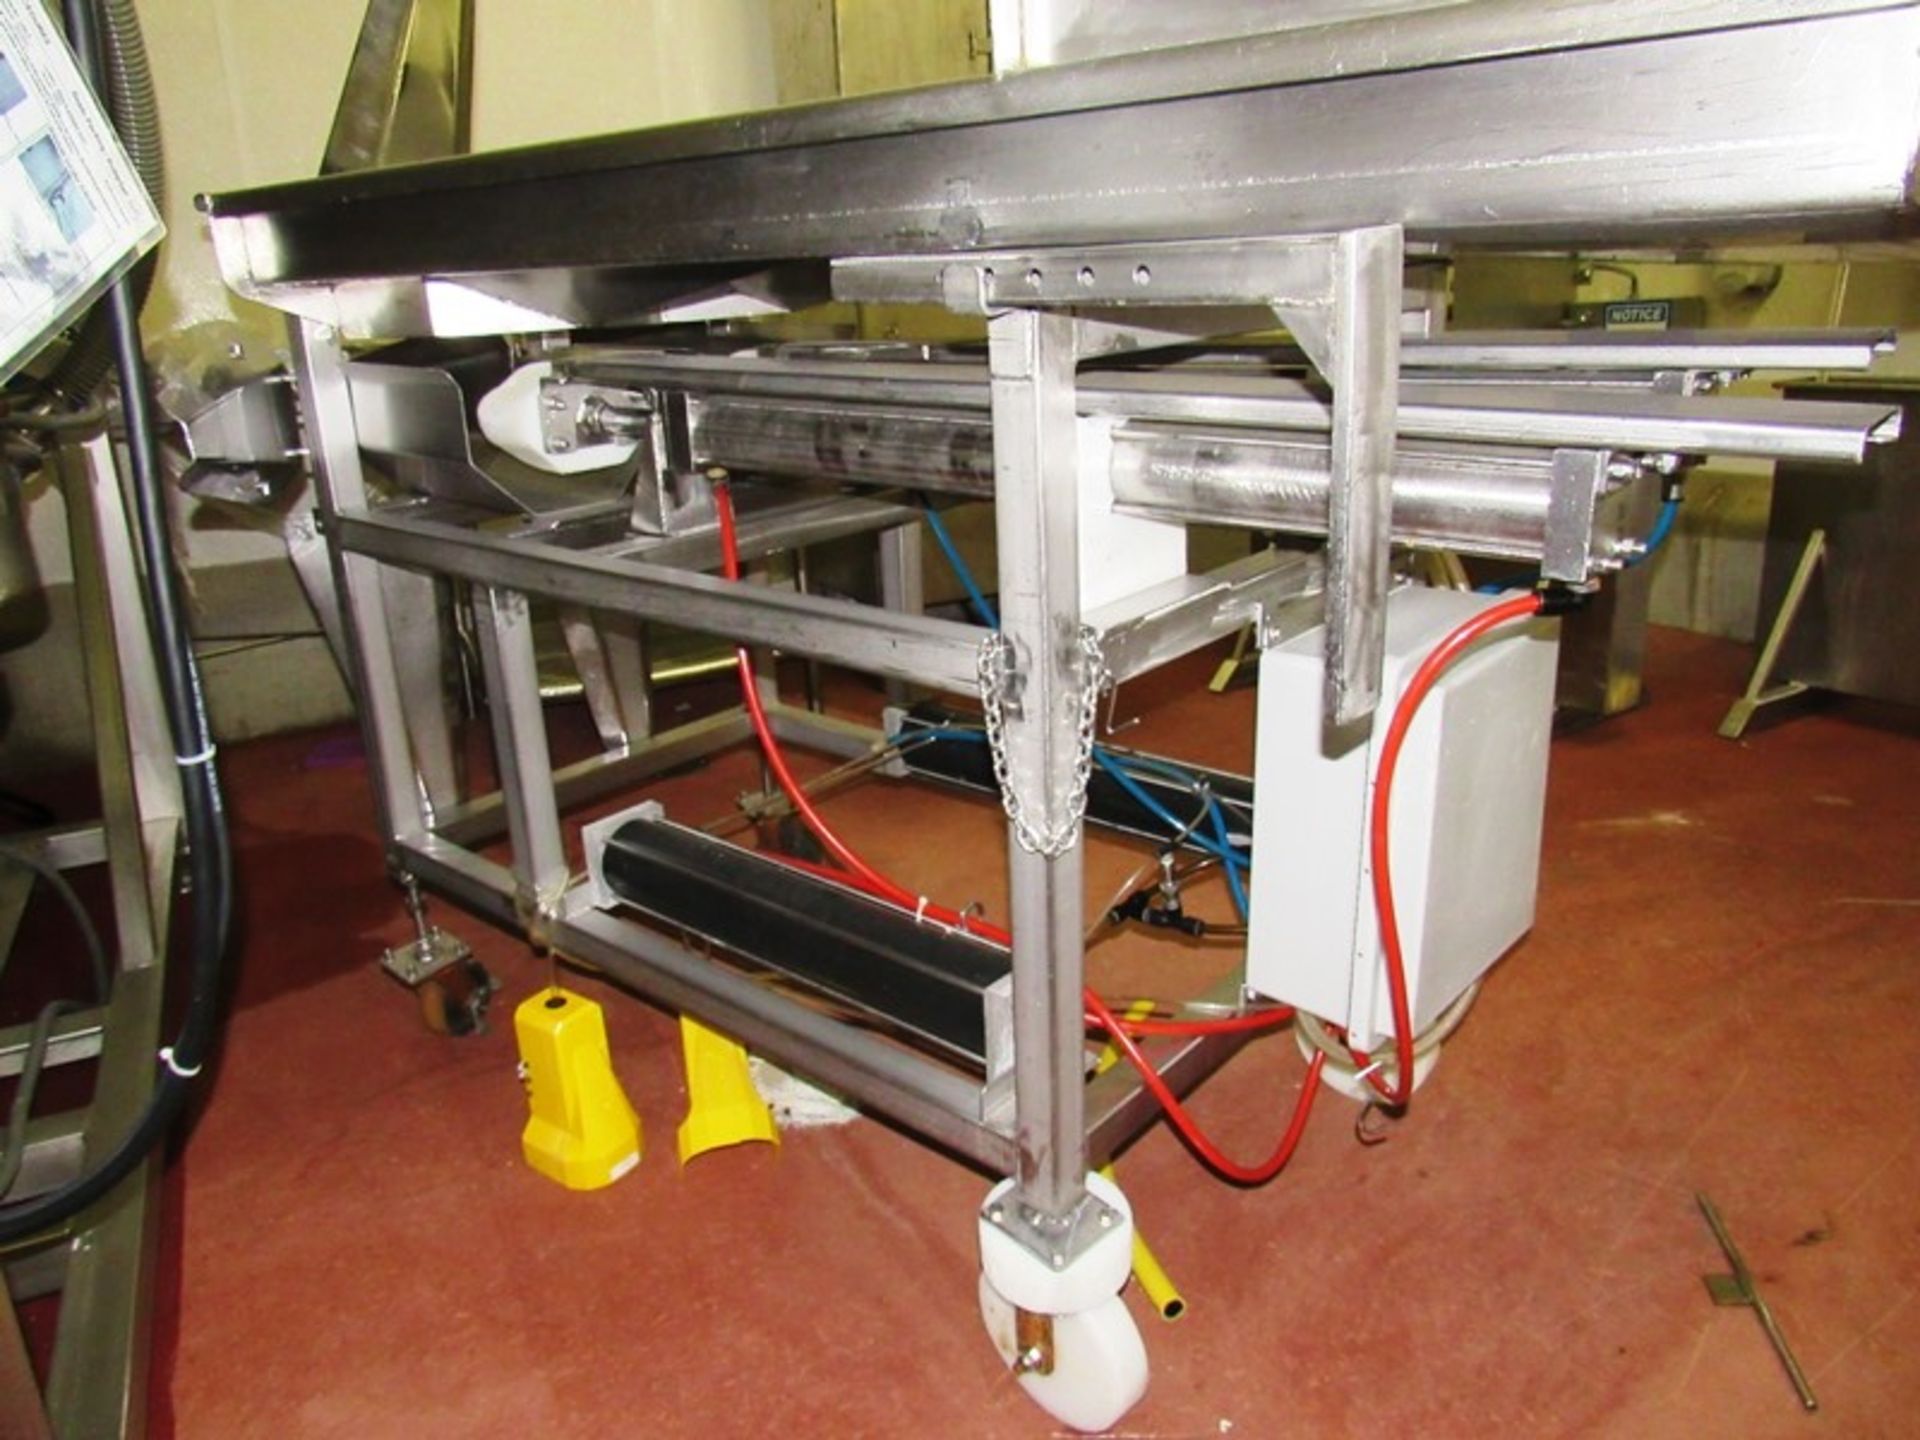 Stainless Steel Pneumatic Piston Ham Loader, dual pistons, foot pedals activation, 36" W X 72" L - Image 3 of 5